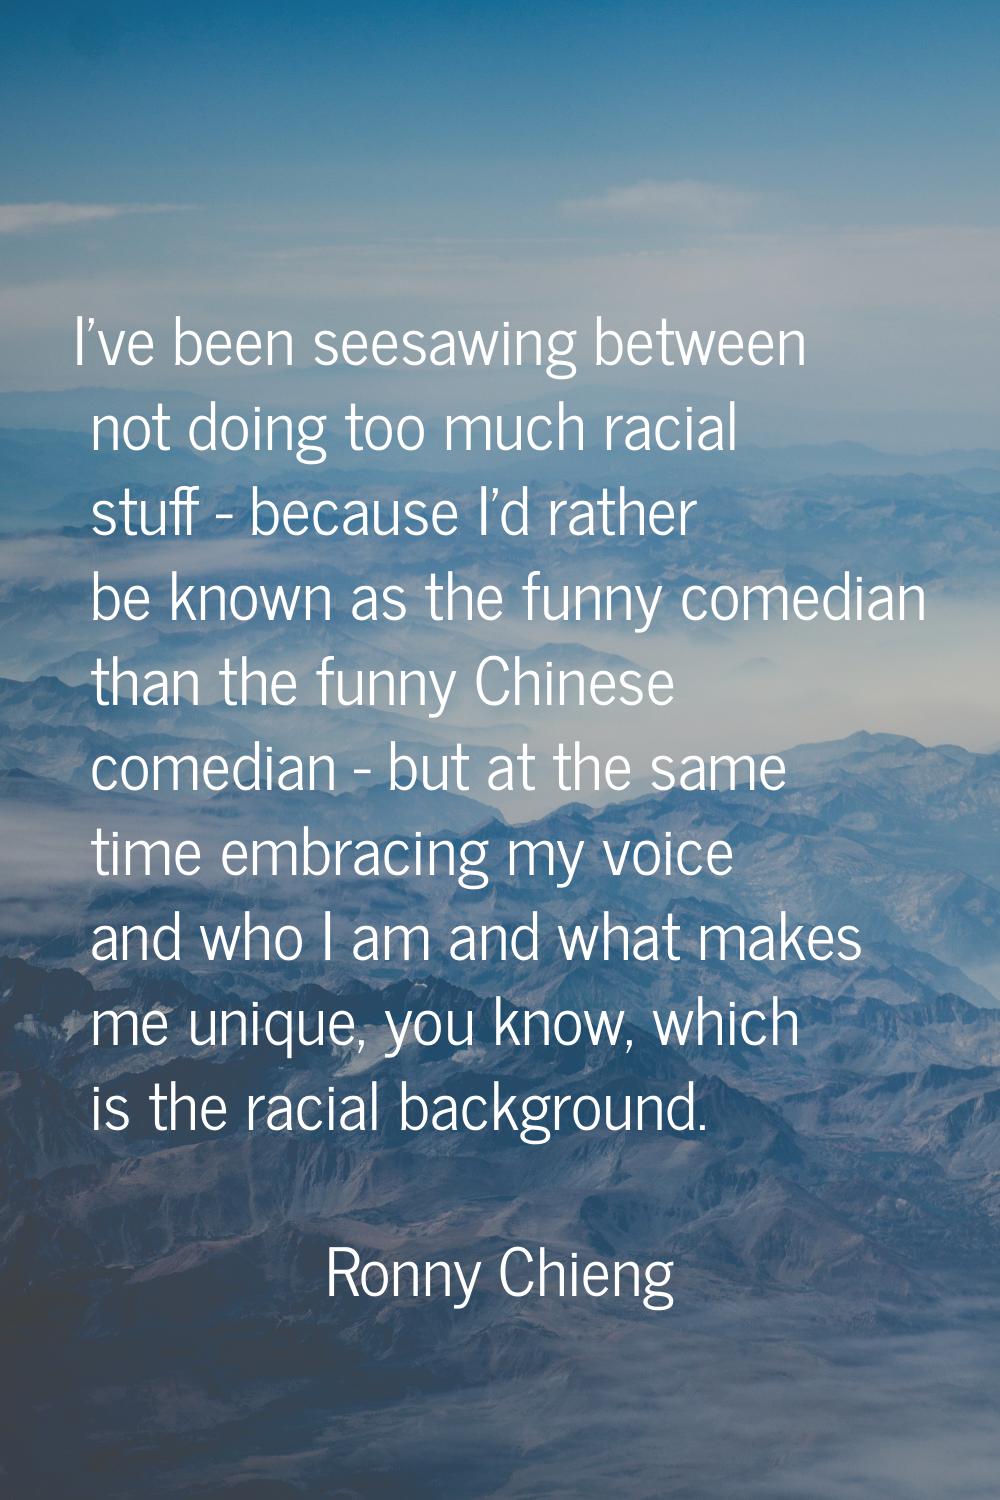 I've been seesawing between not doing too much racial stuff - because I'd rather be known as the fu